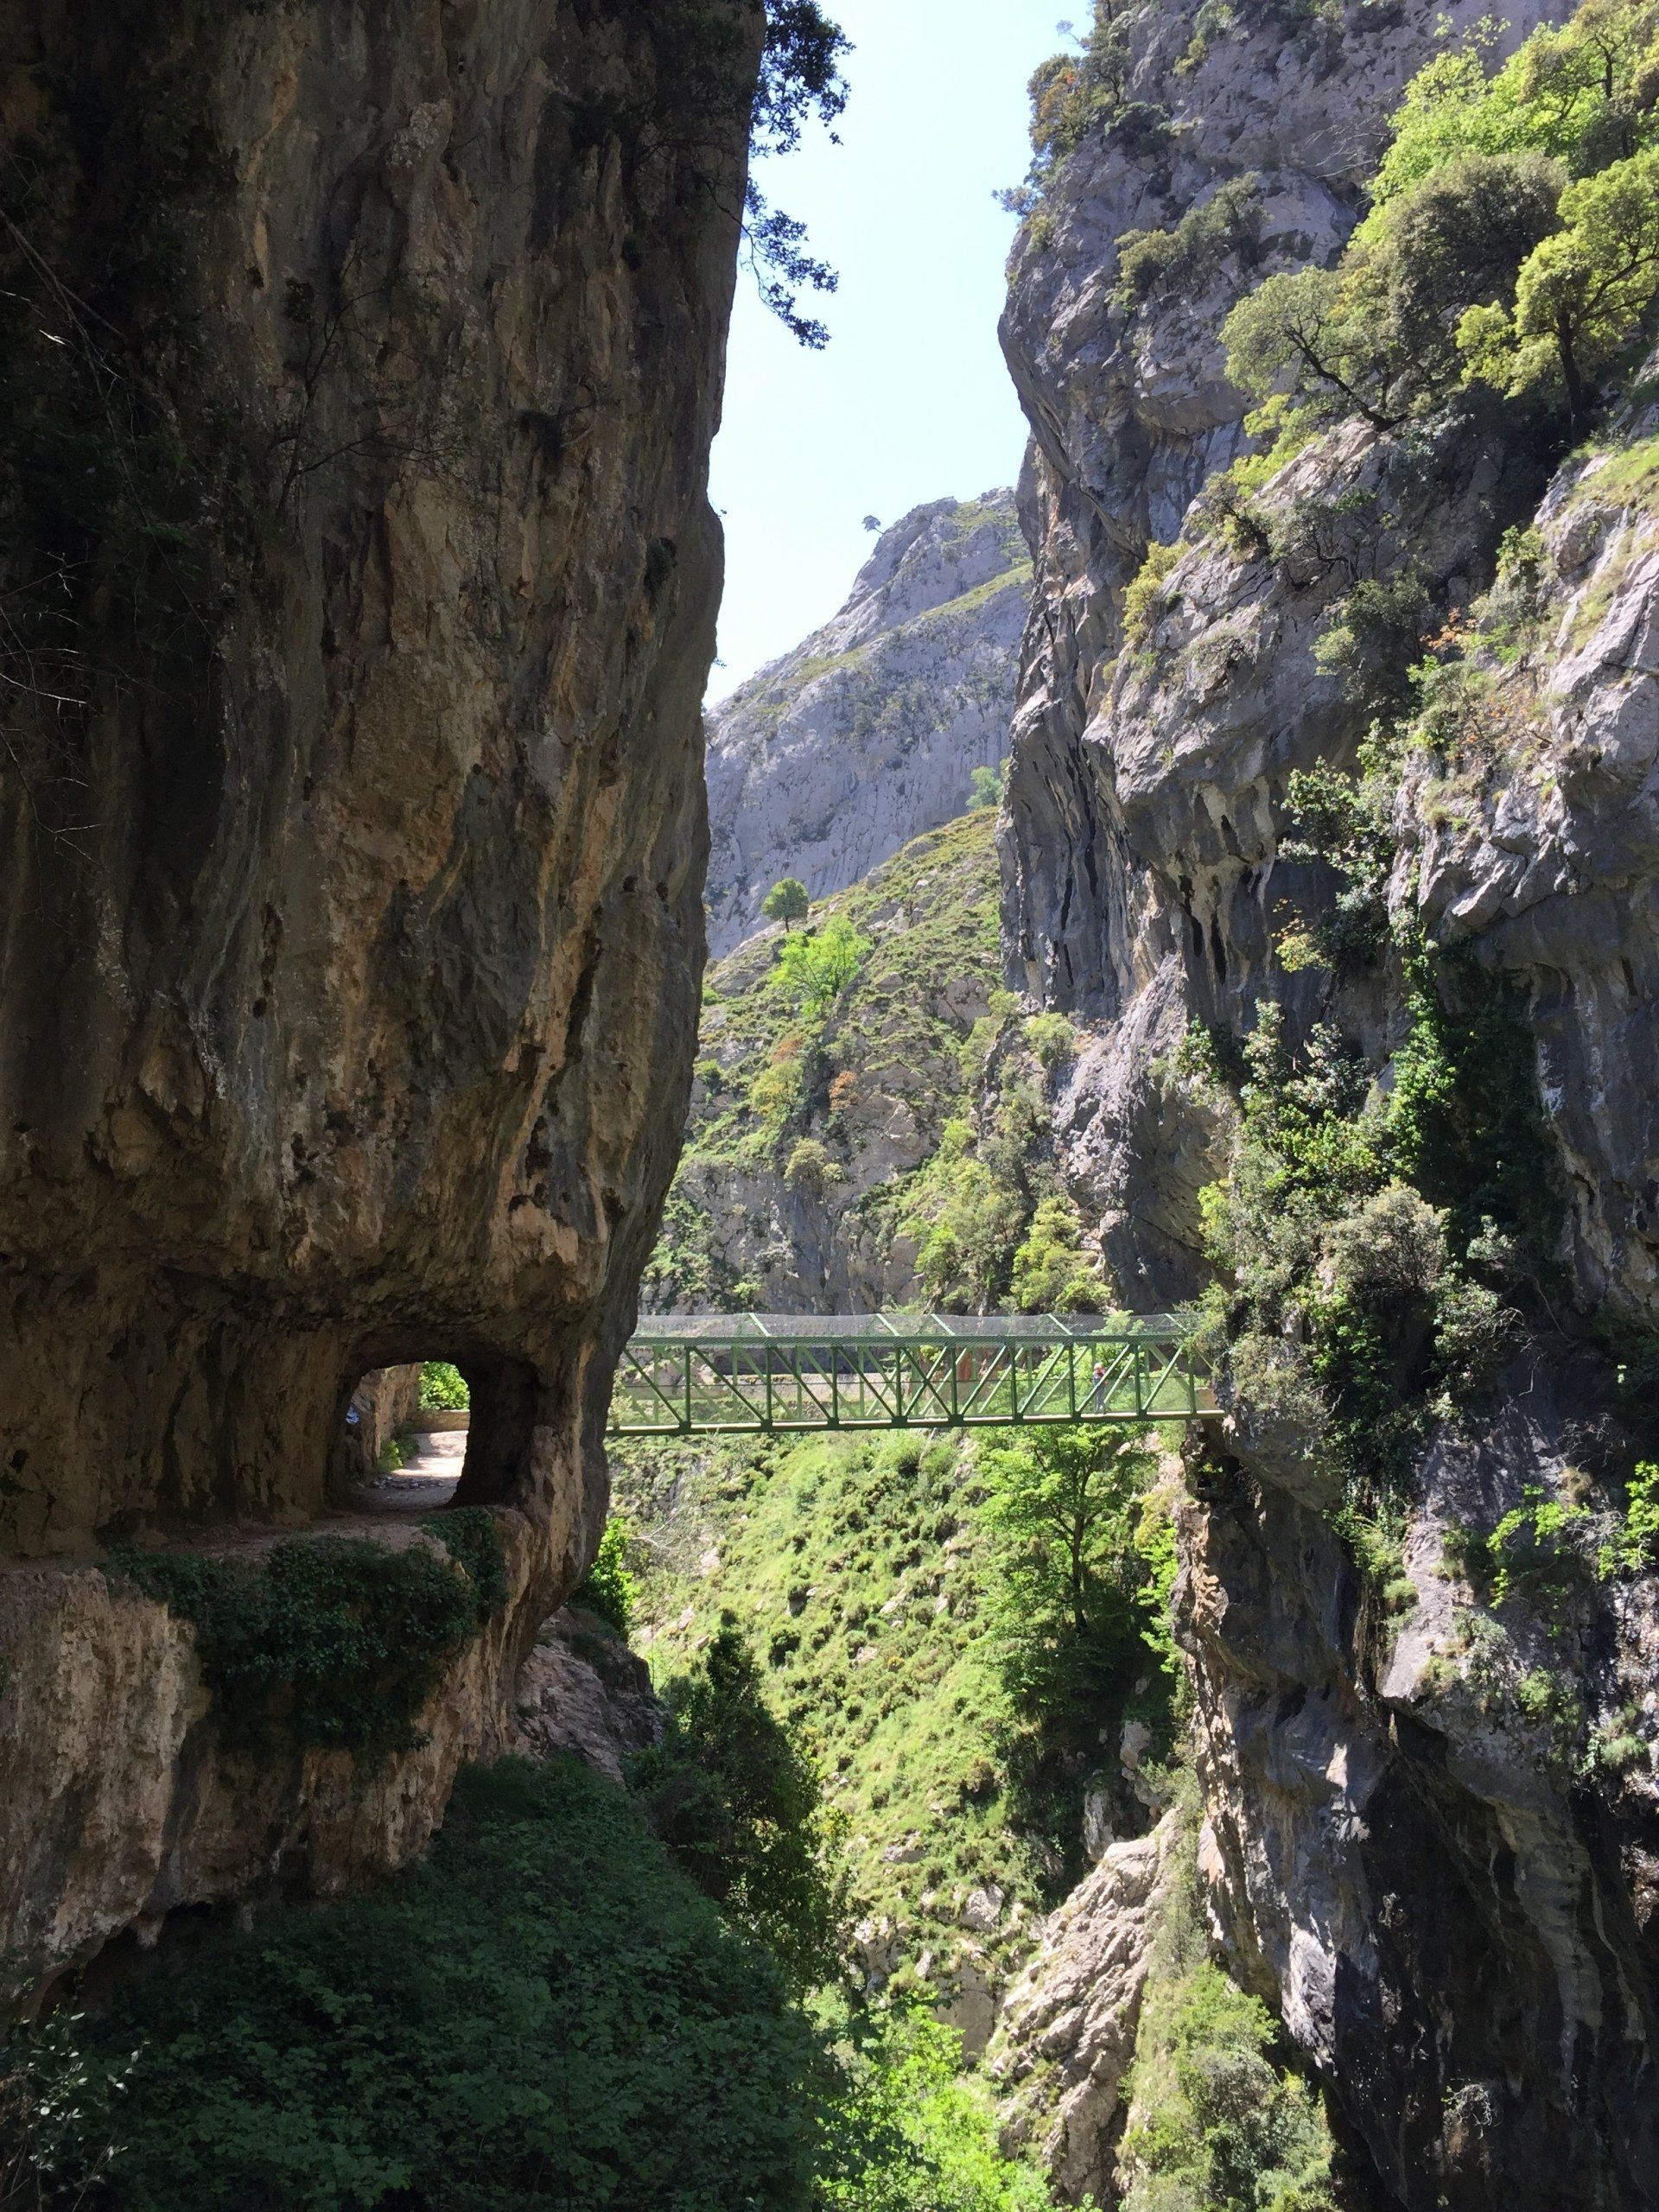 A steel pedestrain walkway constructed between the walls of the Cares Gorge in Asturias in Spain